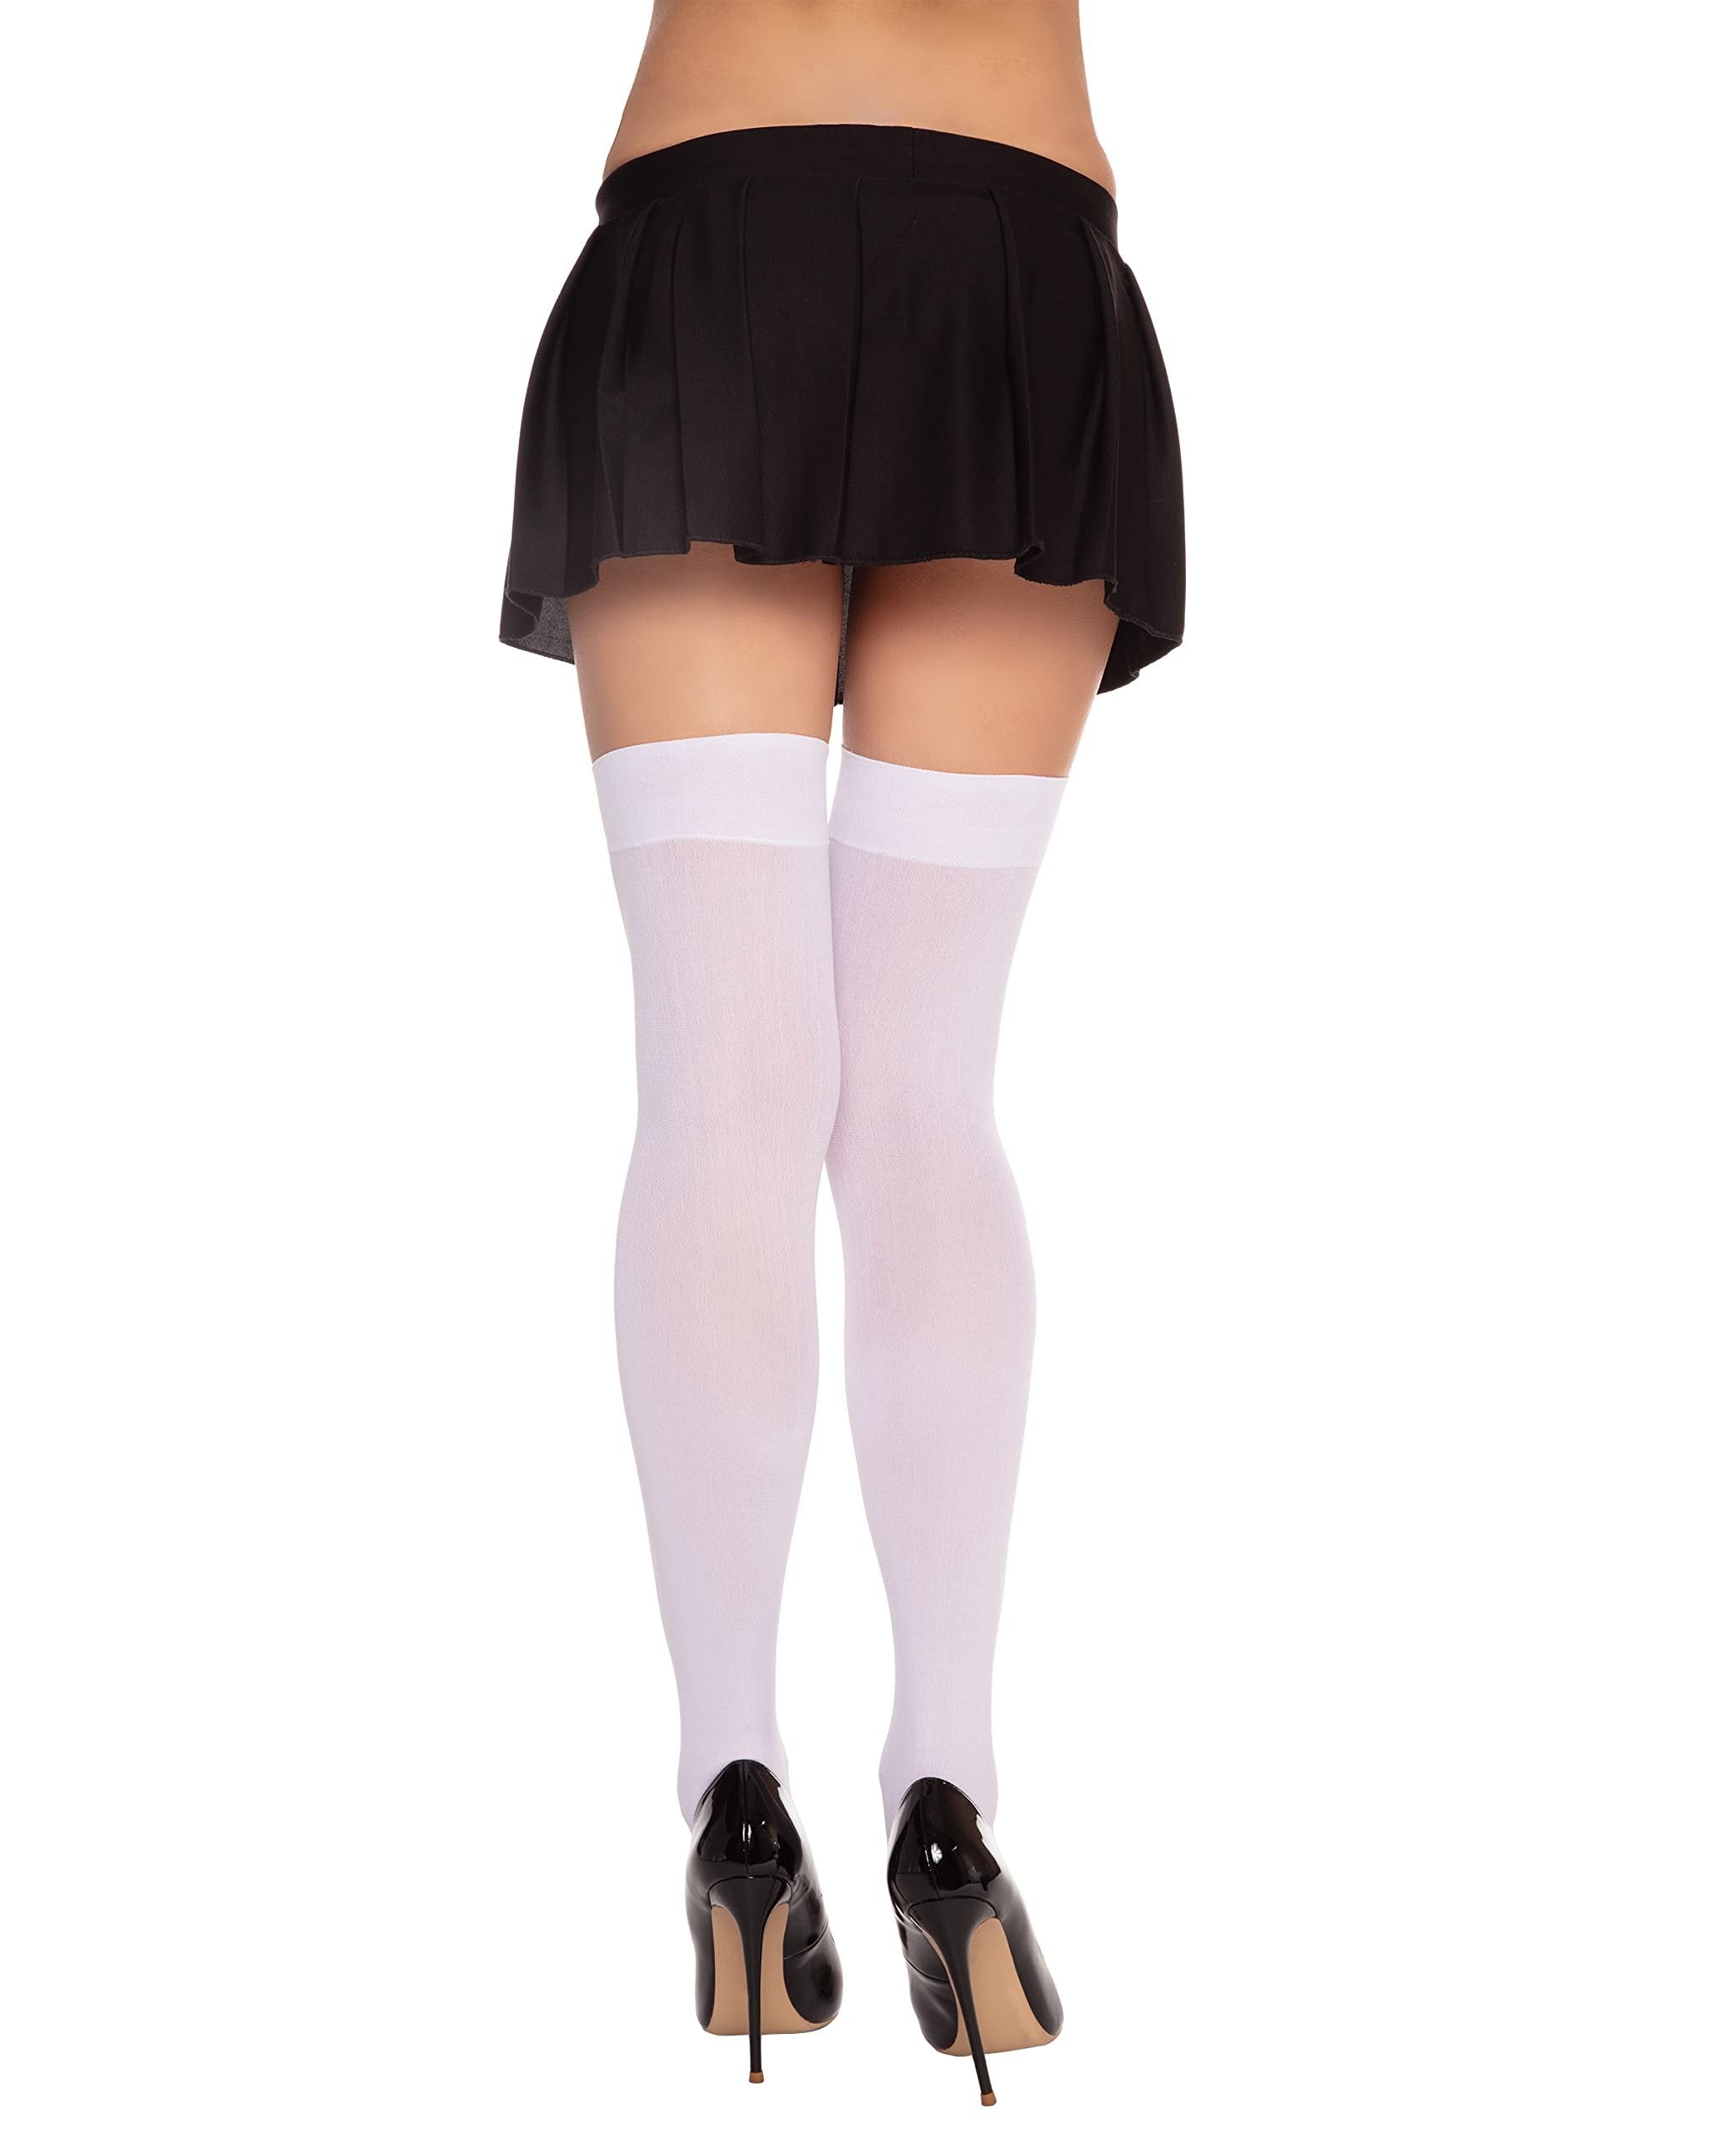 Dreamgirl Women's Sheer Thigh High Stocking with 2 Sets of Bows, Black White Fuschia, One Size